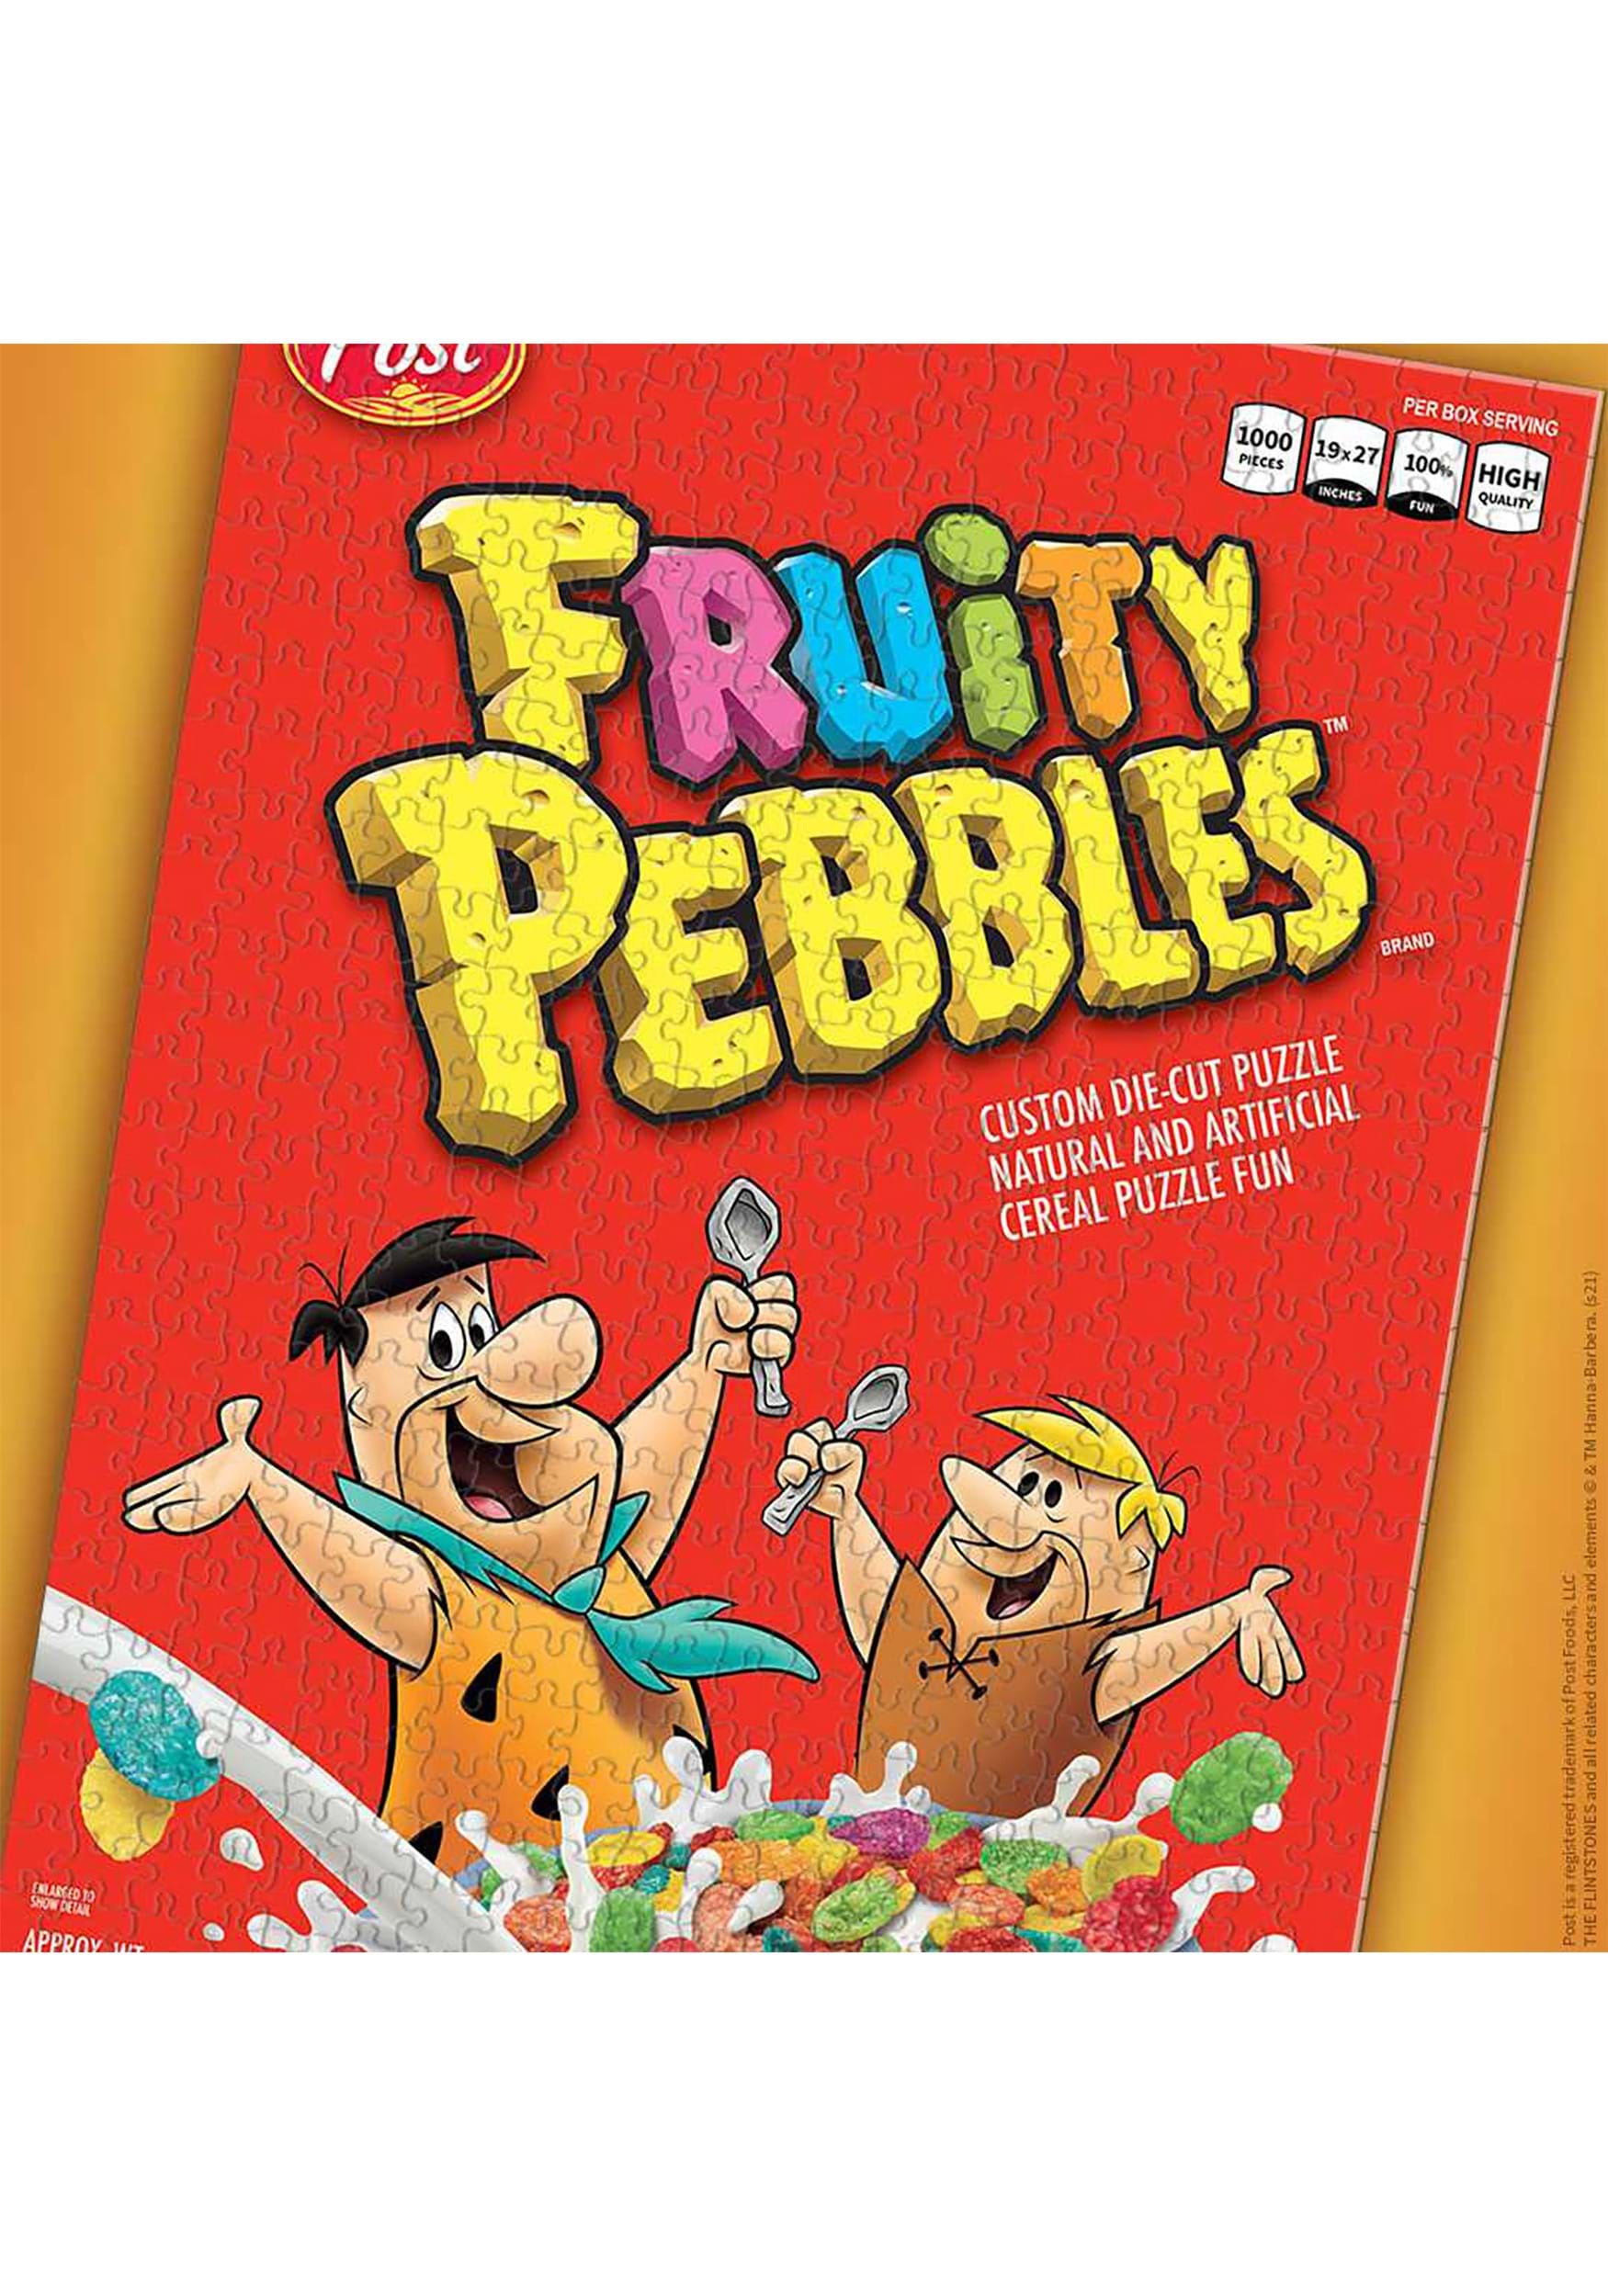 1000 Piece Fruity Pebbles Puzzle , Food And Drink Puzzles